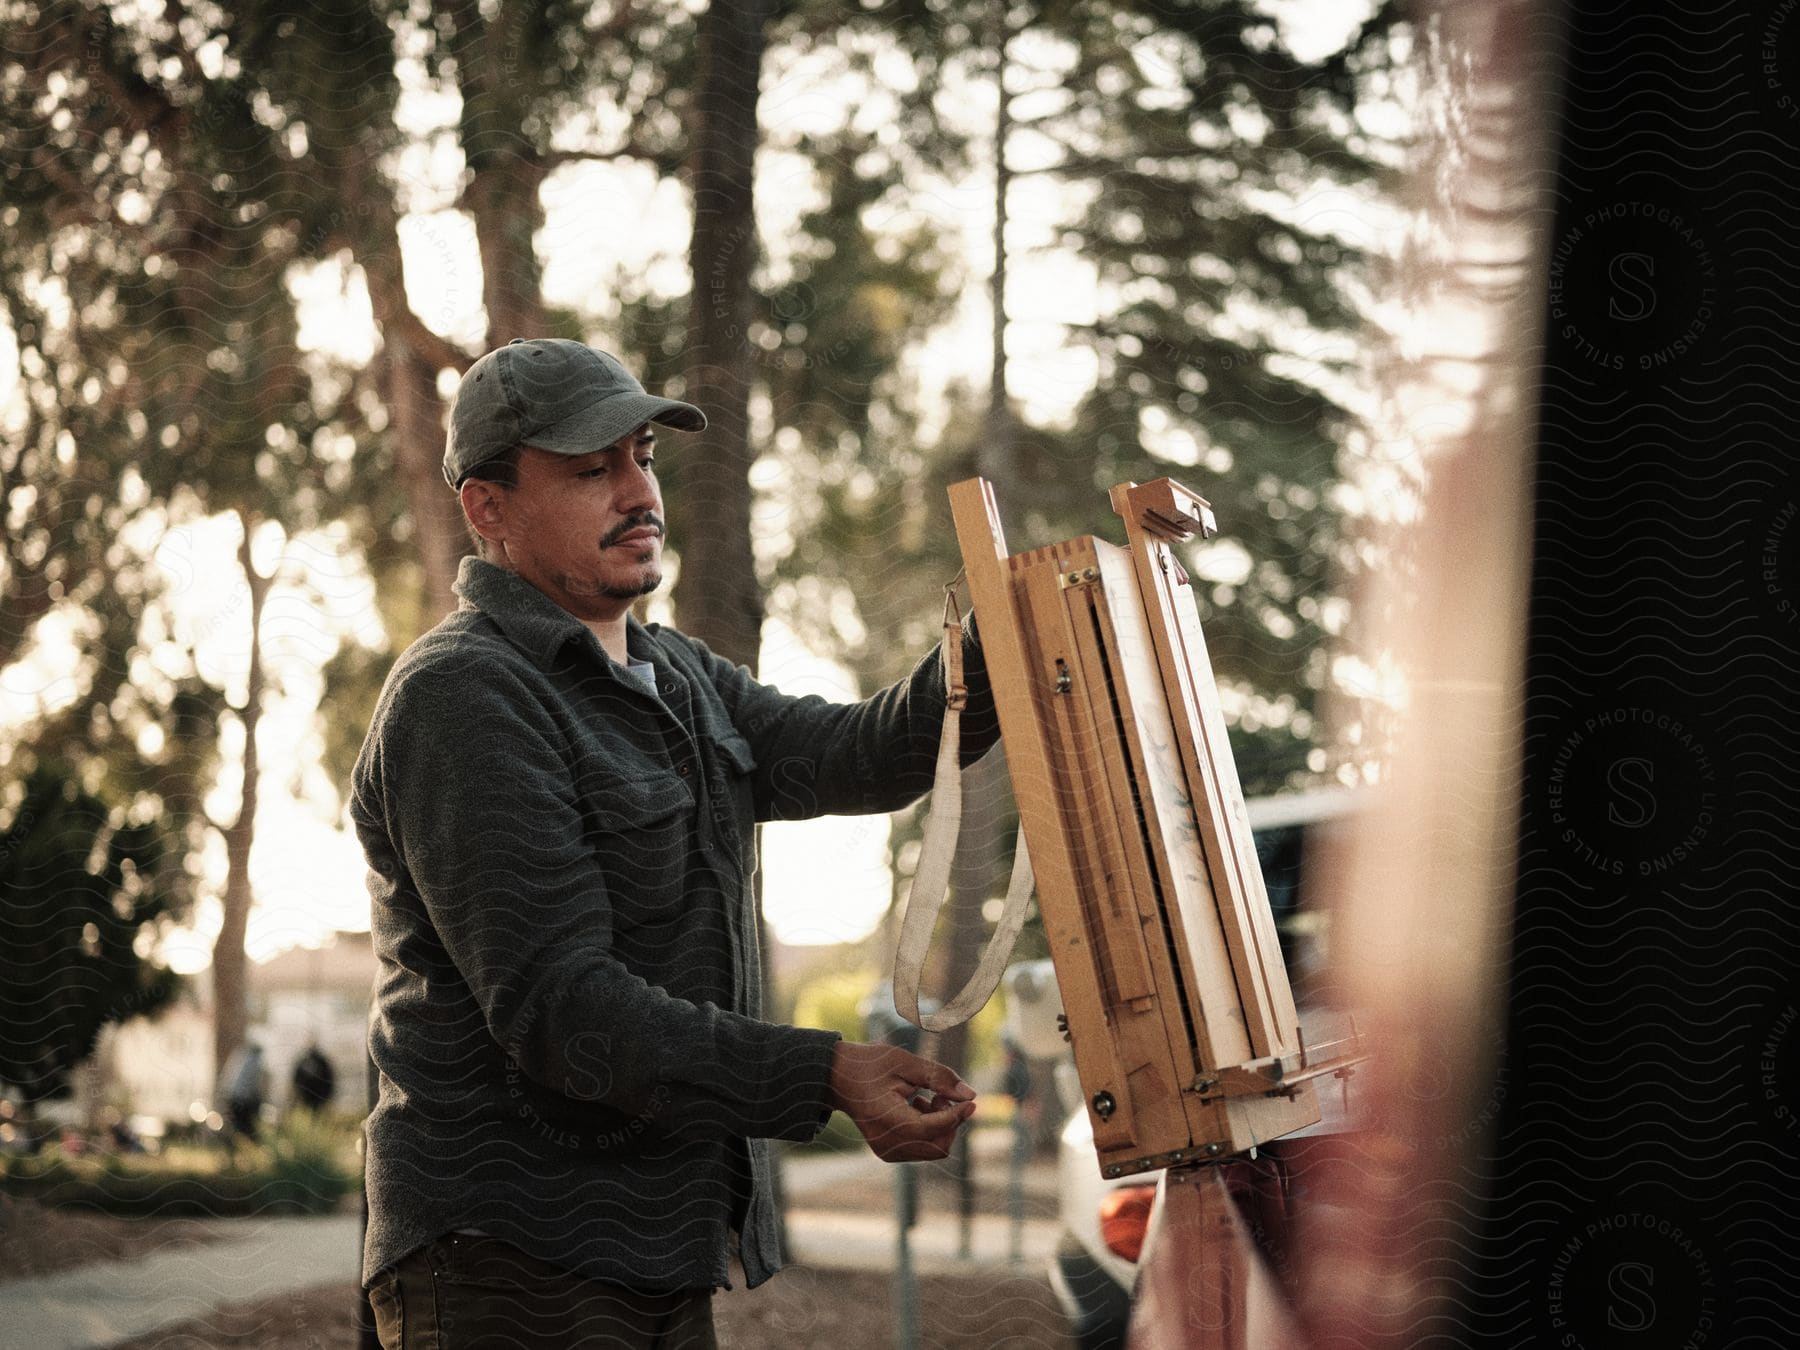 A latino man wearing a cap and long sleeve shirt is seen carrying an easel in a forest